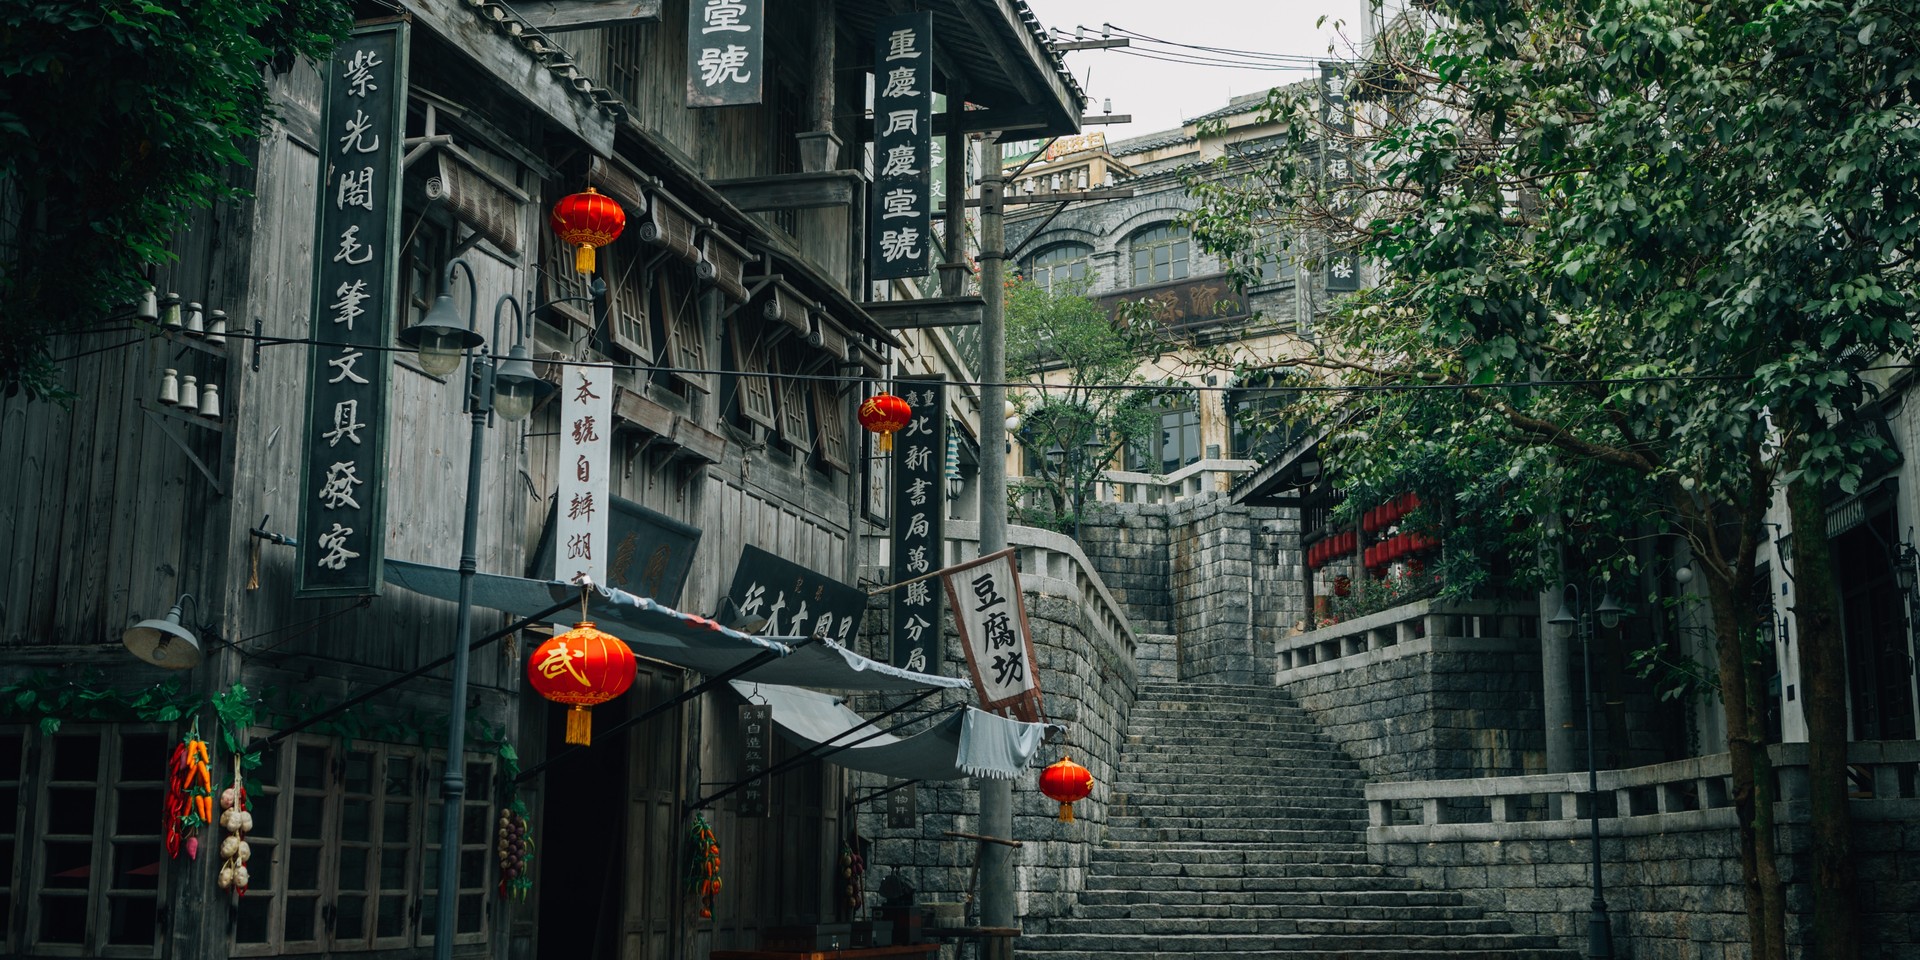 DISMISS MISCONCEPTIONS: THINGS YOU DIDN'T KNOW ABOUT CHINA